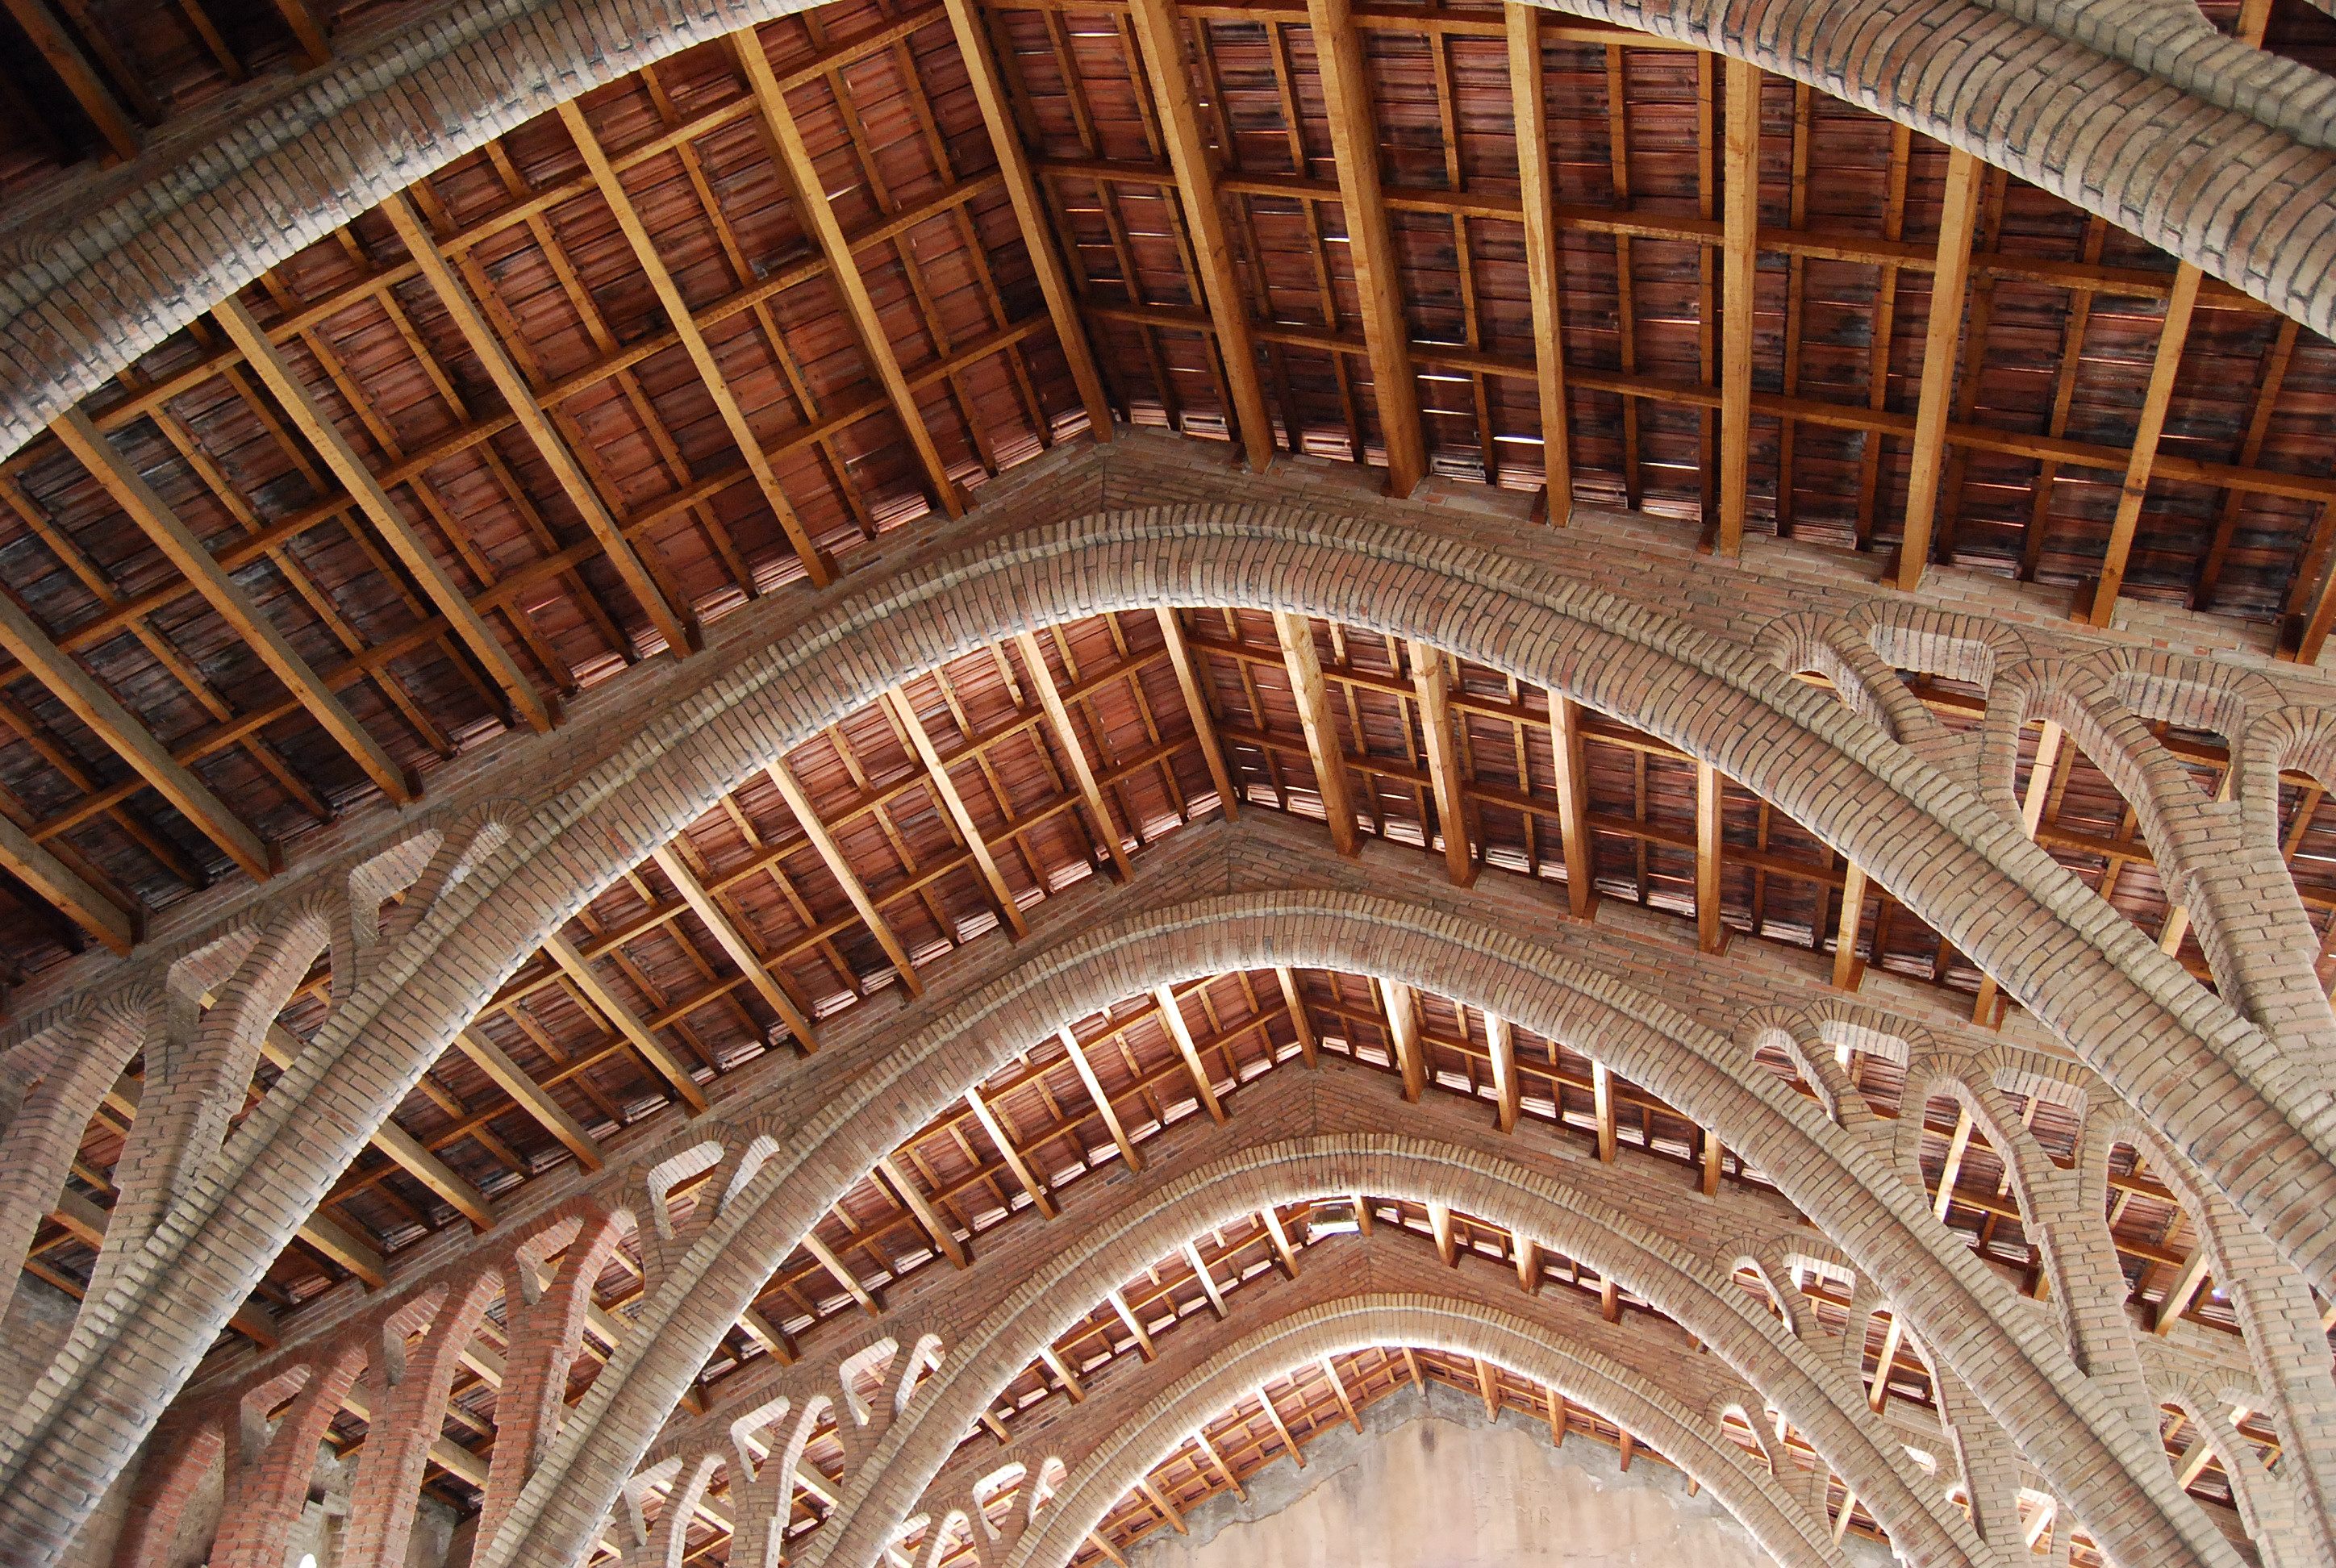 The soaring ceiling of El Pinell de Brai's "wine cathedral," also designed by Cèsar Martinell.